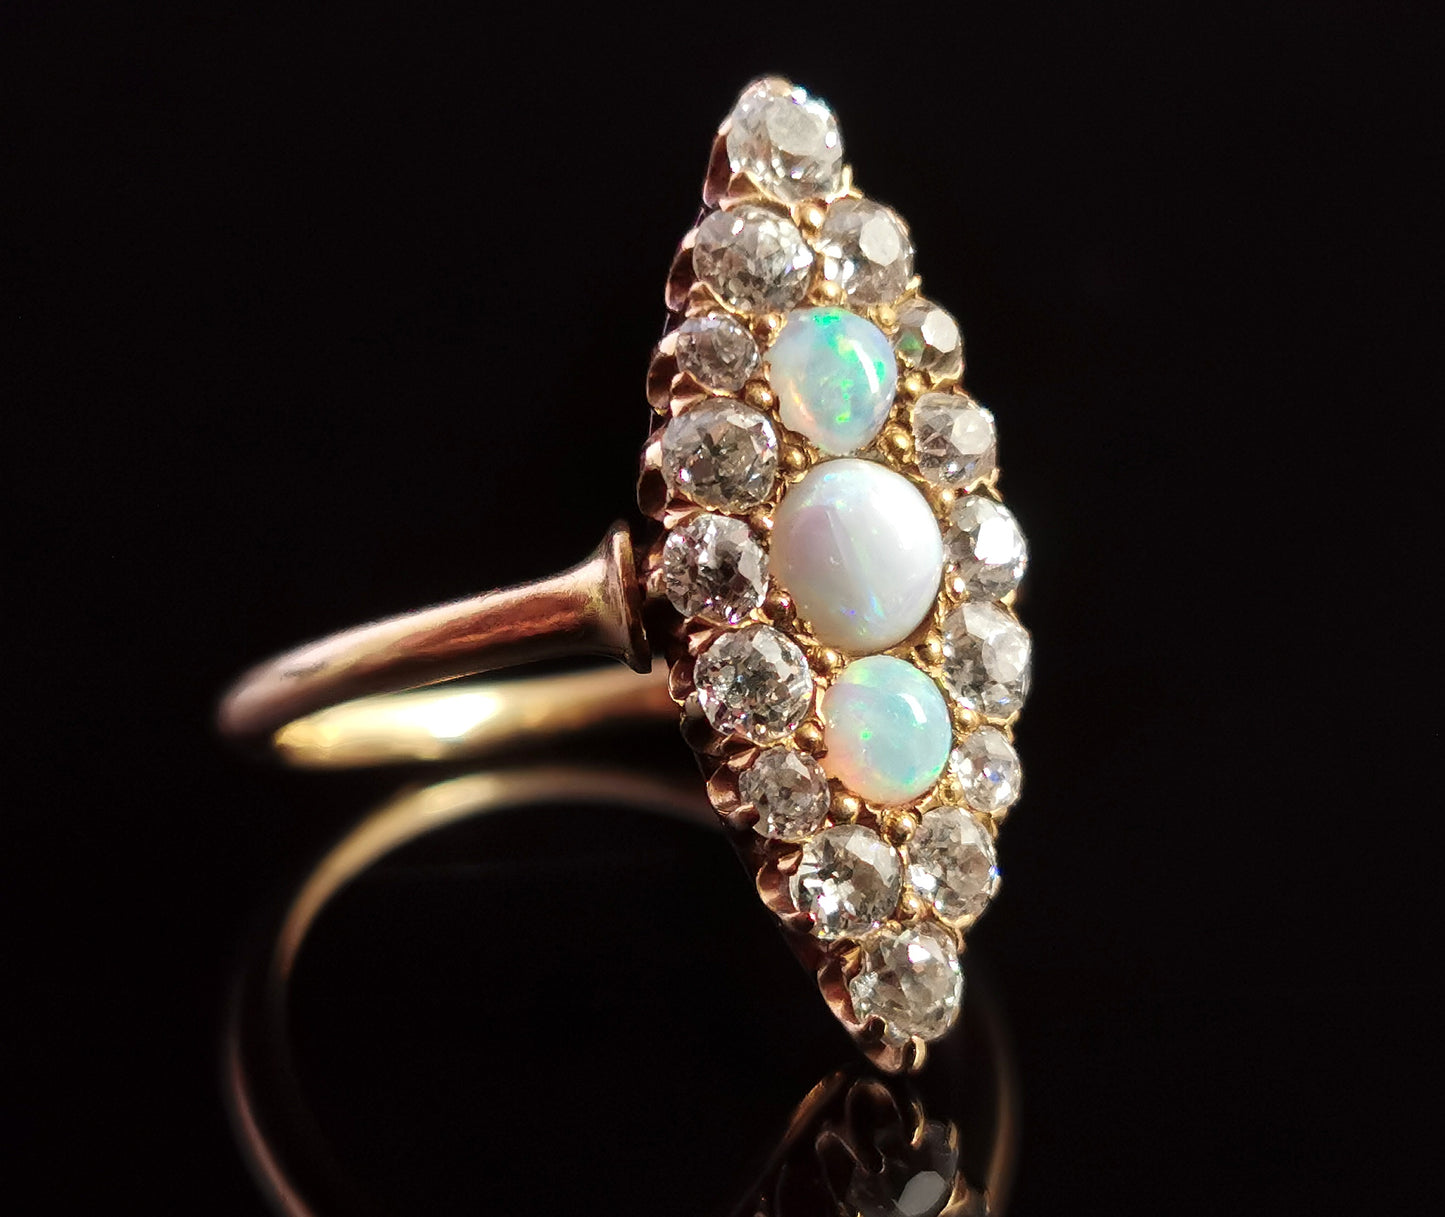 Antique Diamond and Opal navette ring, 18ct gold, Edwardian